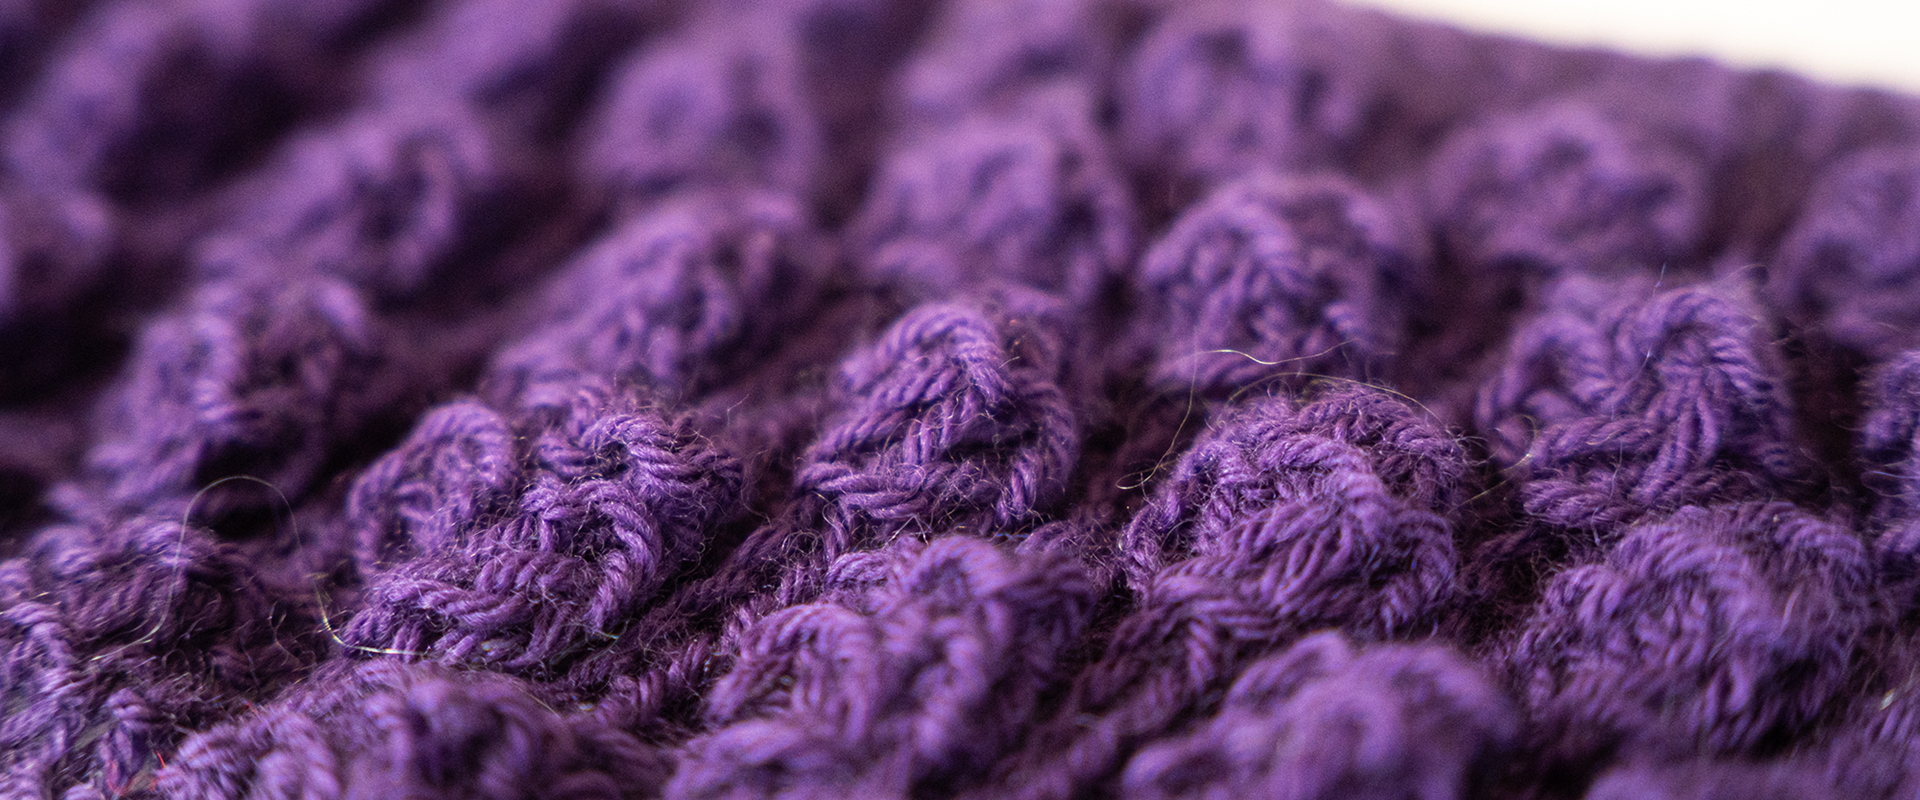 This purple sample was made by Veronica Leach, a volunteer knitter part of the Fleece to Fashion project.